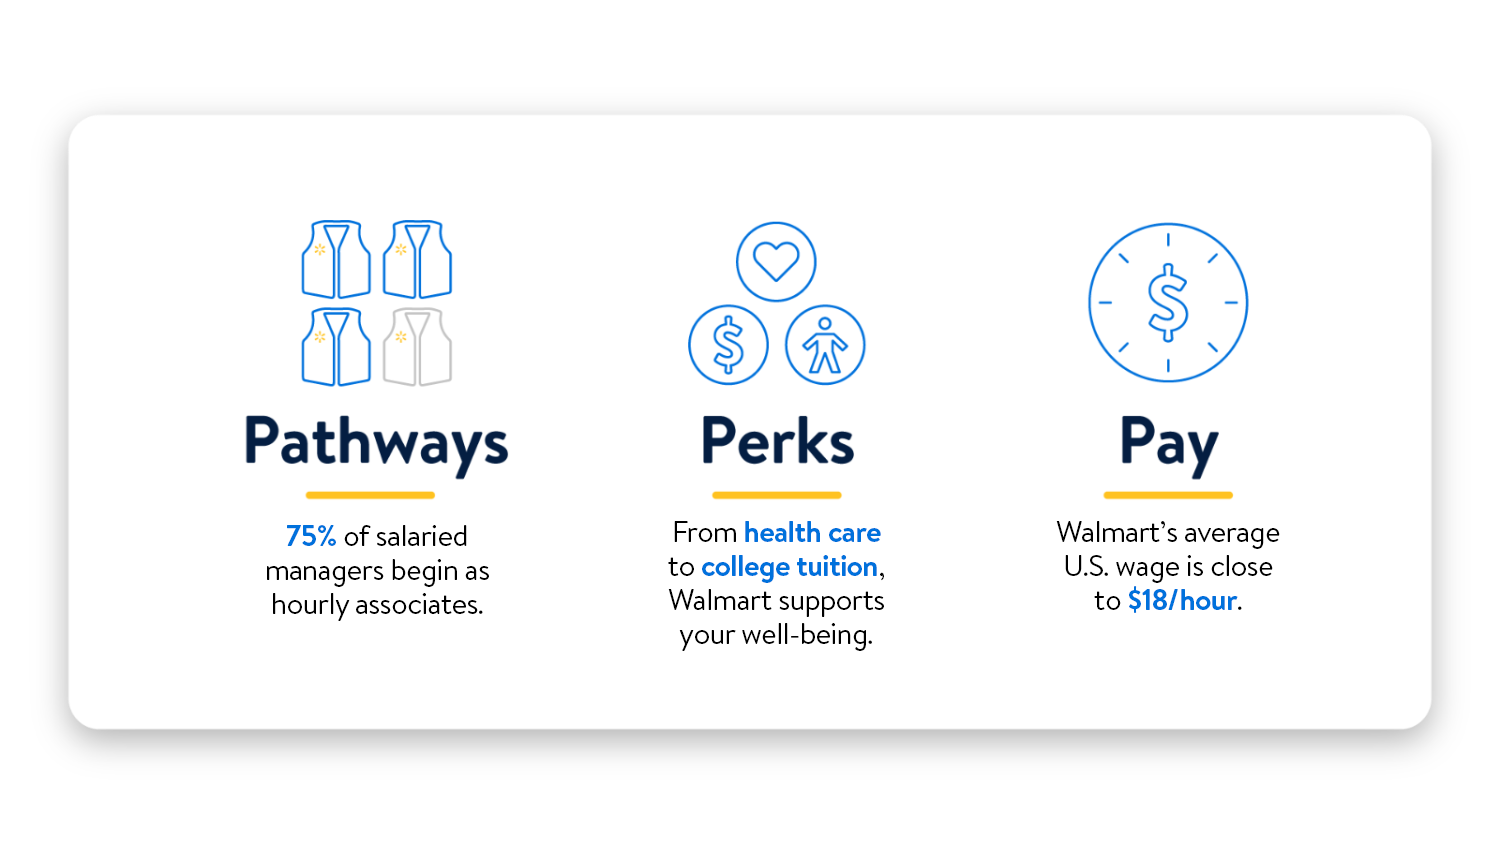 Image shows three graphics: Pathways, Perks and Pay. Under Pathways the description reads, "75% of salaried managers begin as hourly associates." Under the Perks graphic the description reads, "From health care to college tuition, Walmart supports your well-being." Under the Pay graphic the description reads, "Walmart's average U.S. wage is more than $17.50/hour.